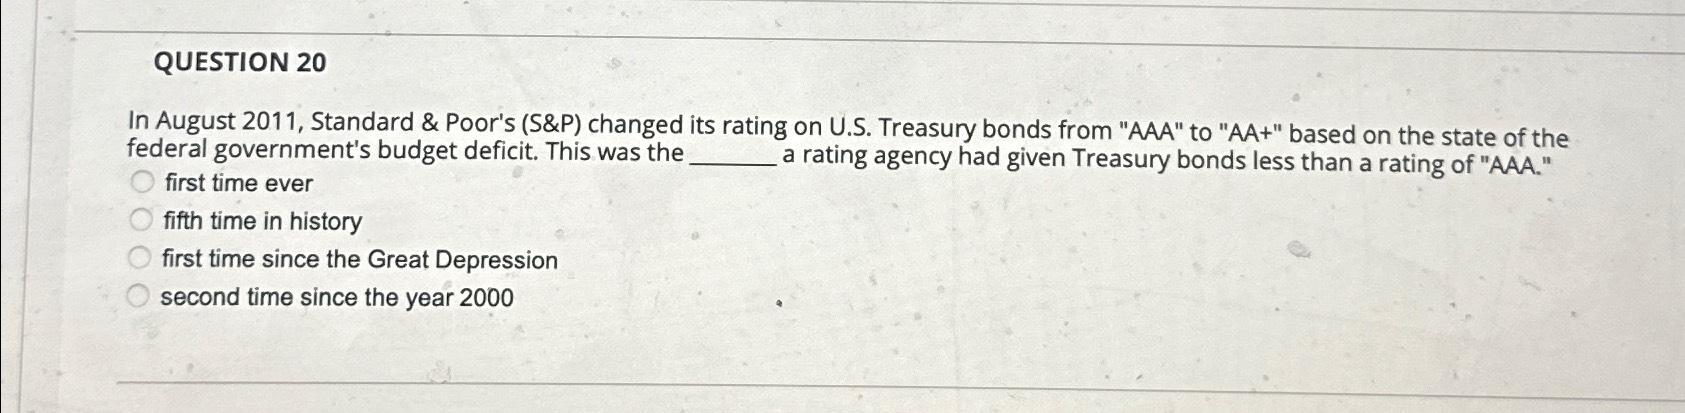 QUESTION 20 In August 2011, Standard & Poor's (S&P) changed its rating on U.S. Treasury bonds from 